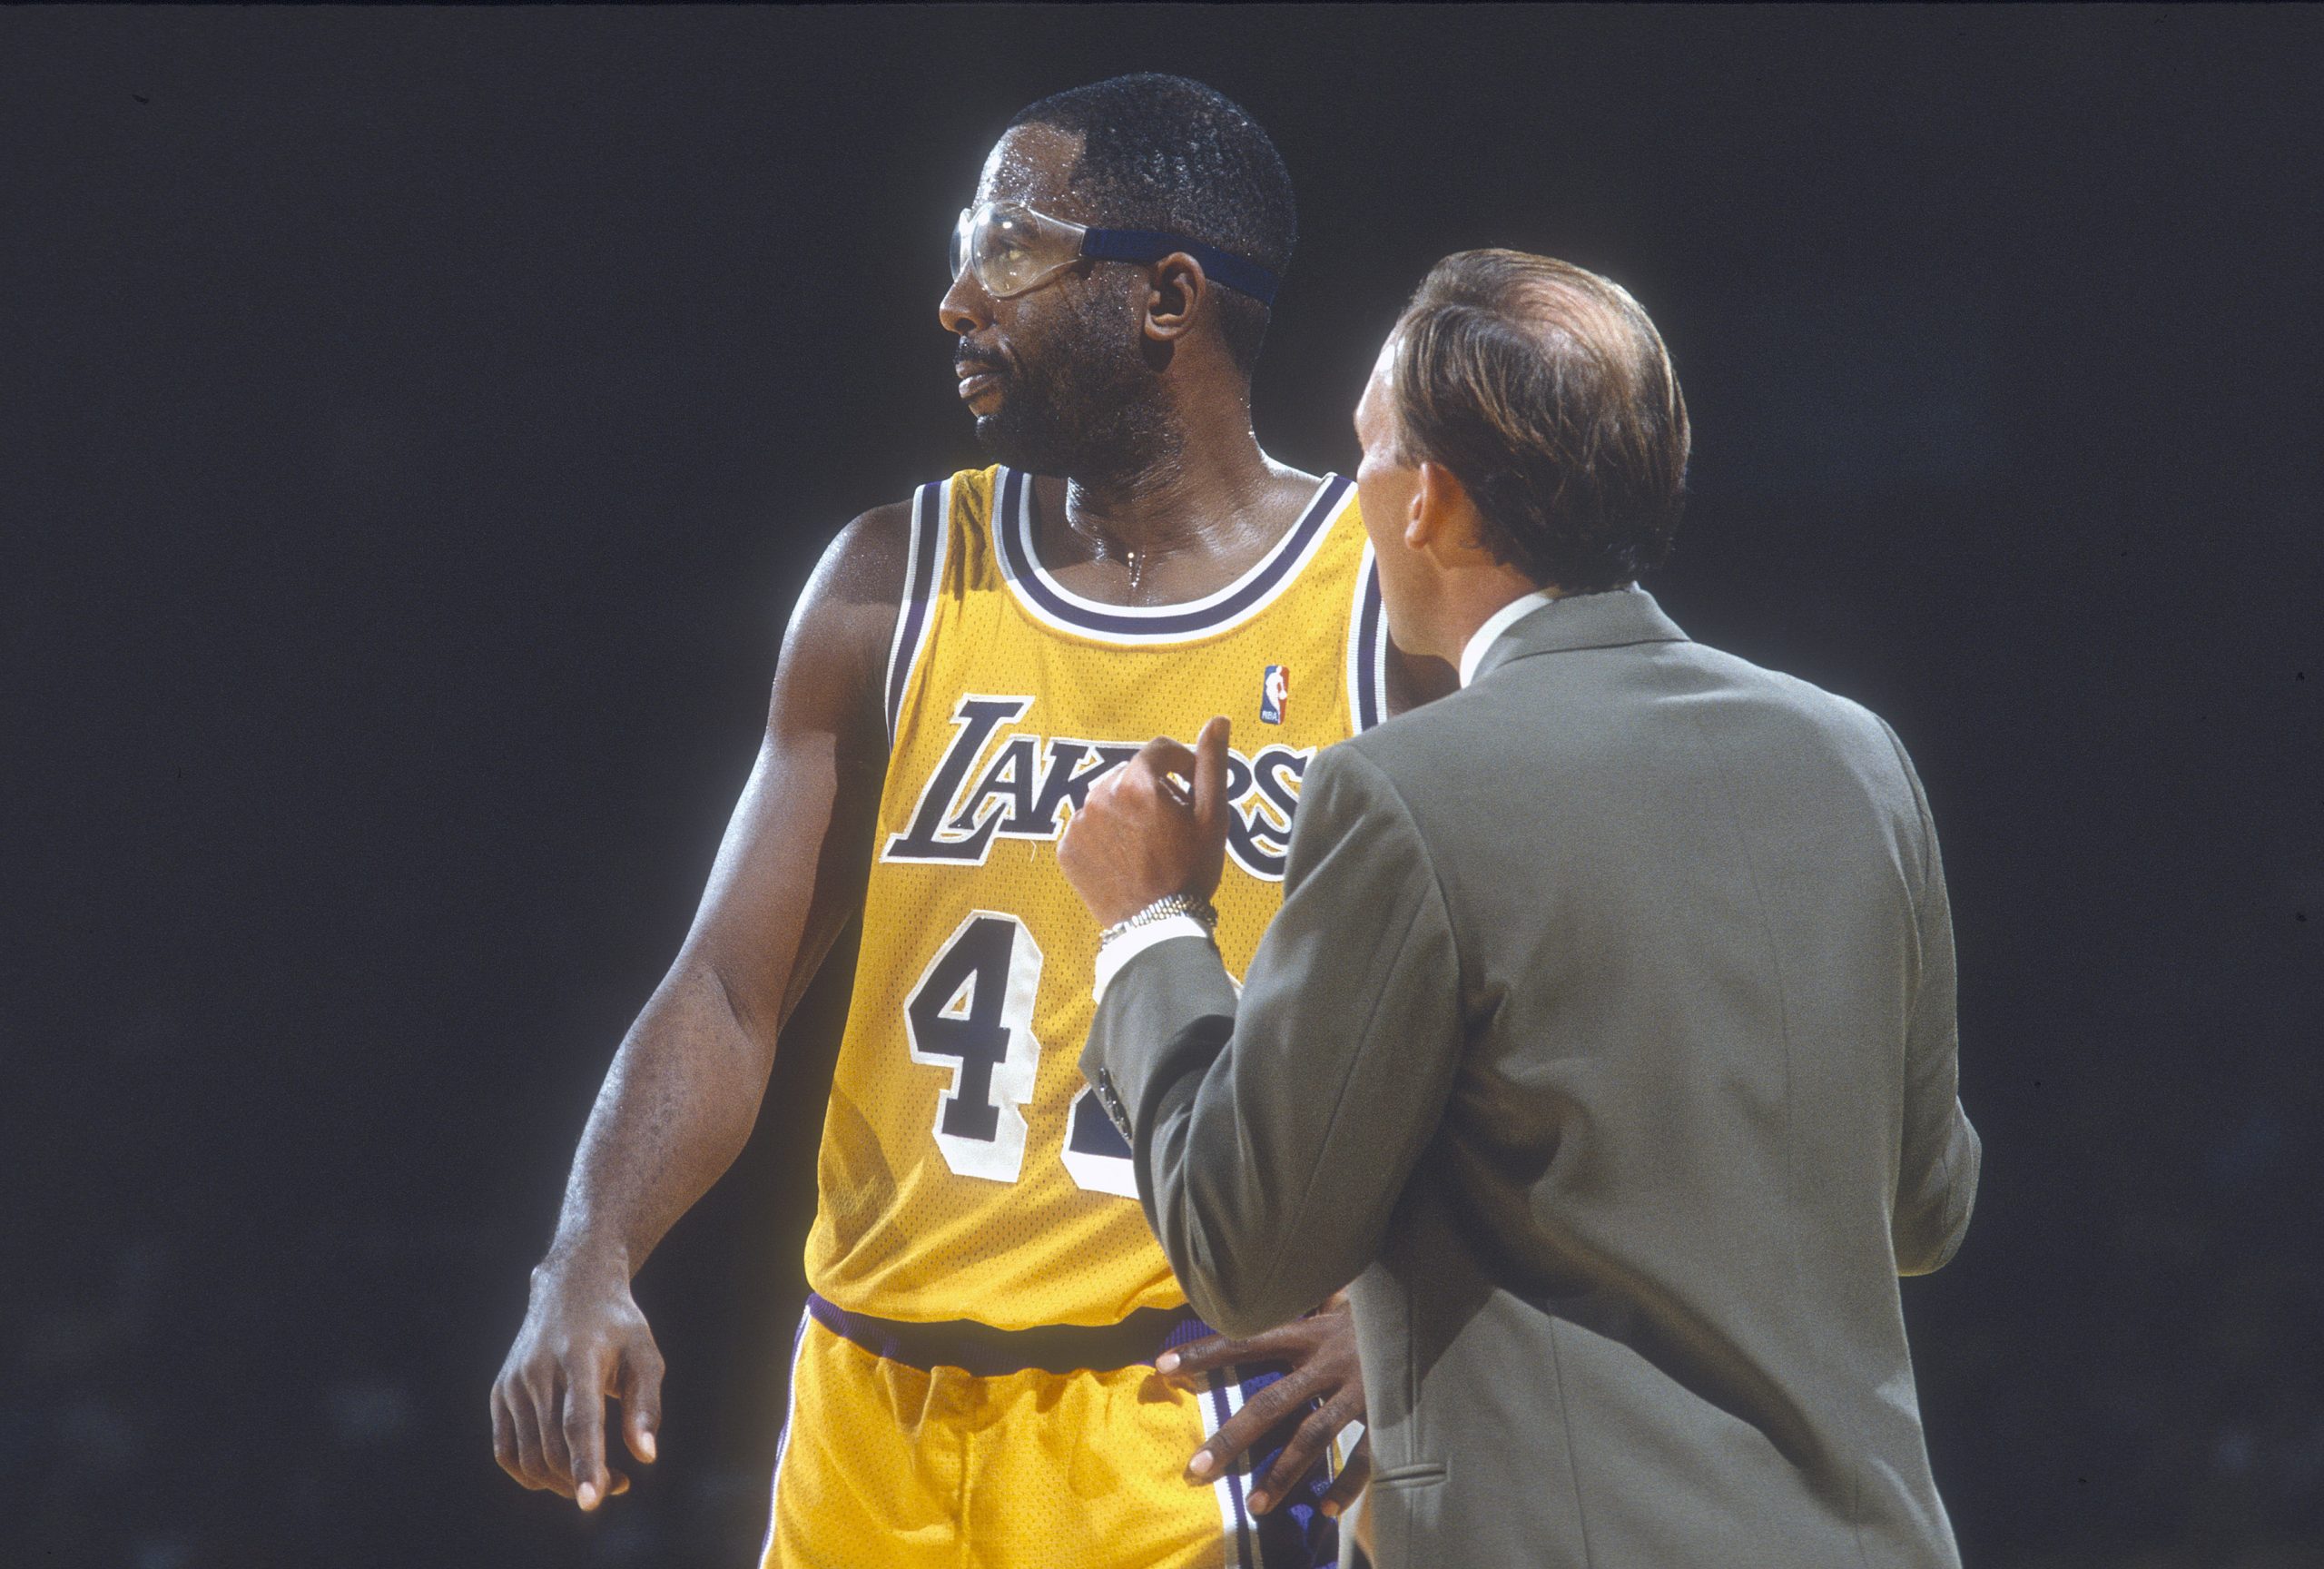 James Worthy of the Los Angeles Lakers talks with head coach Mike Dunleavy.